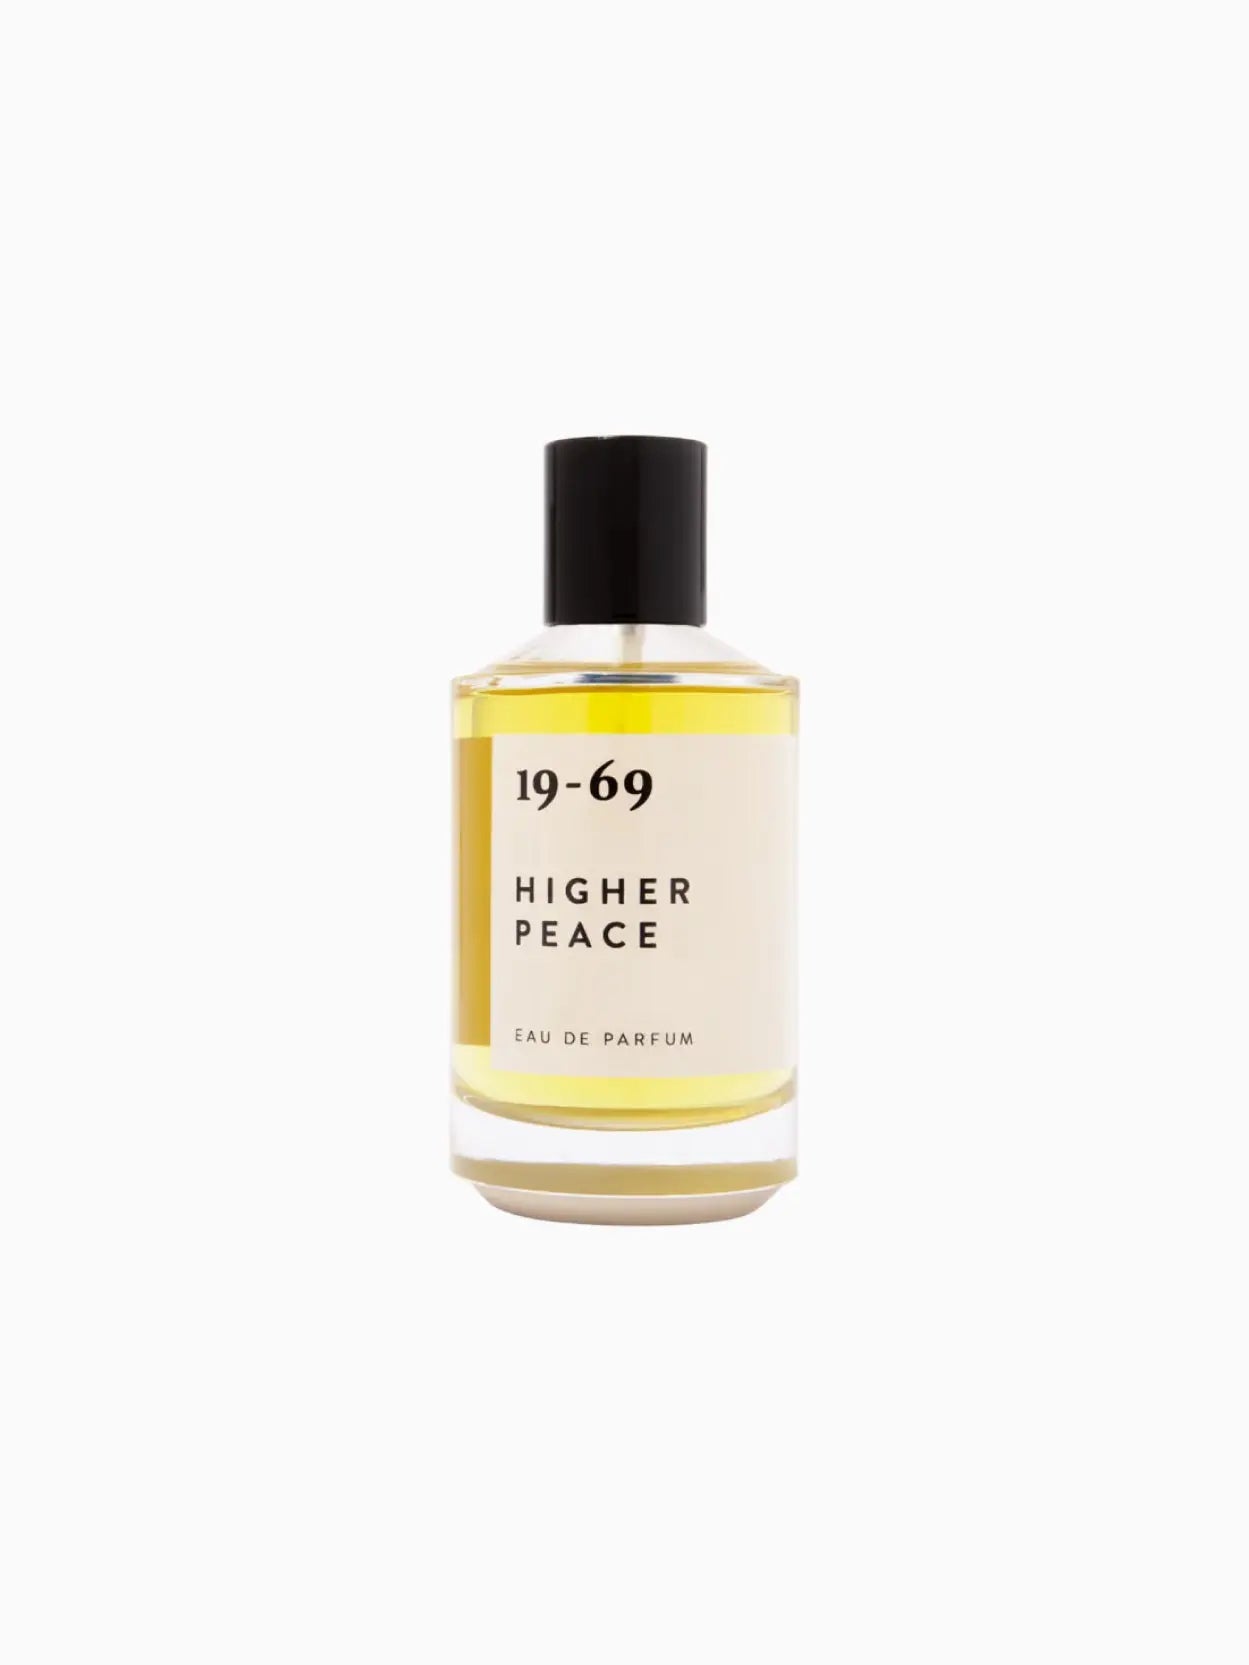 A bottle of perfume with a yellow liquid inside. The label reads "Higher Peace 100ml." The bottle, available at Bassalstore in Barcelona, features a black cap and minimalist design against a plain white background.